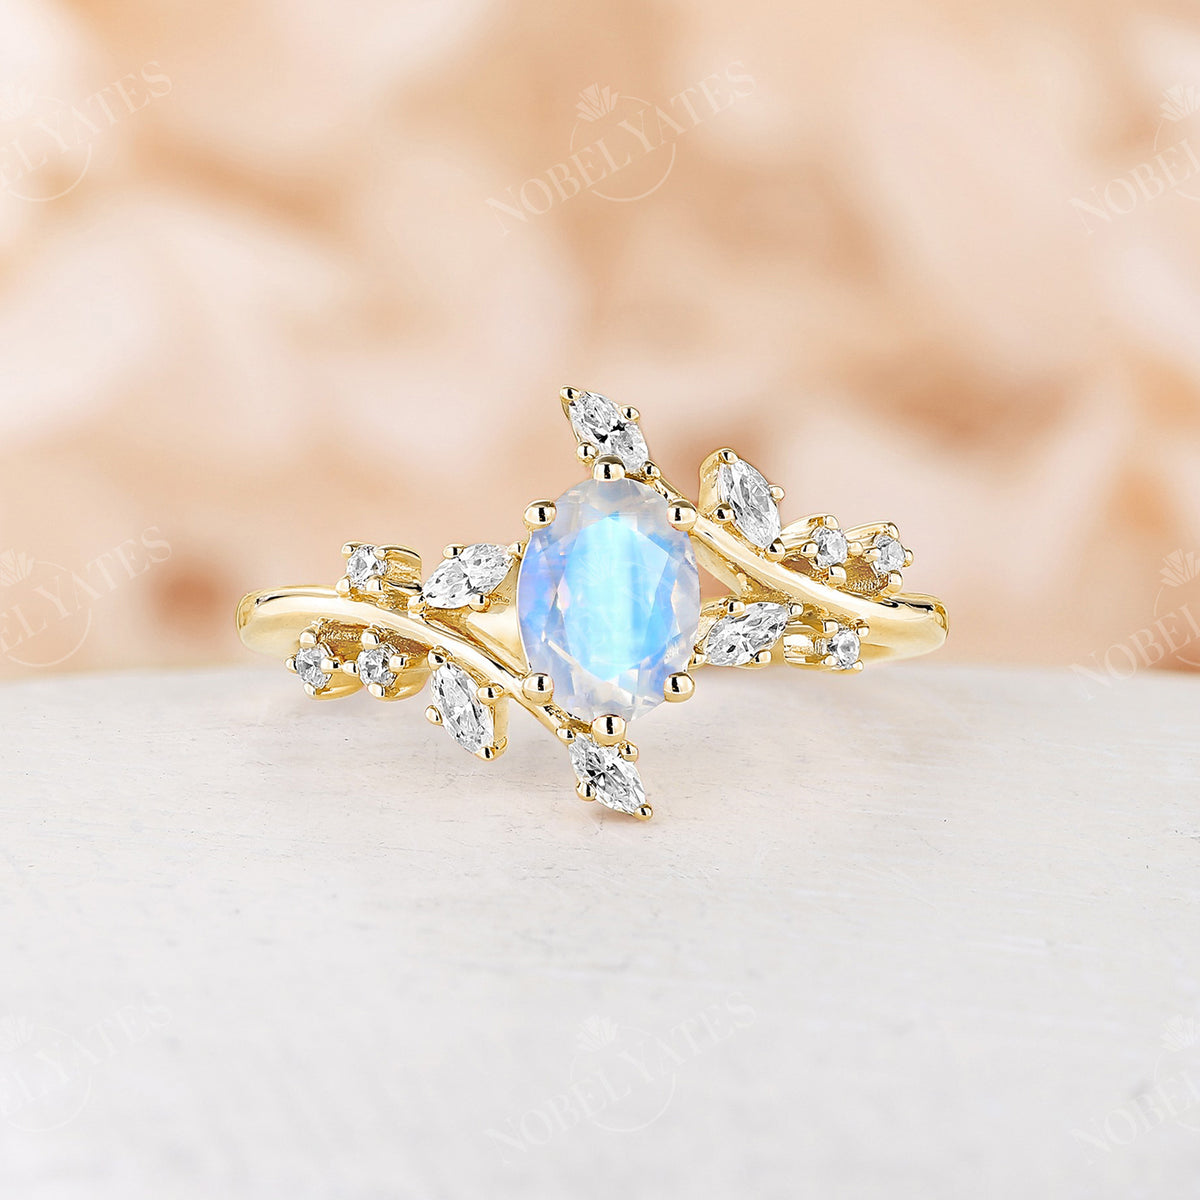 Nature Inspired Branch Engagement Ring Oval White Opal Rose Gold